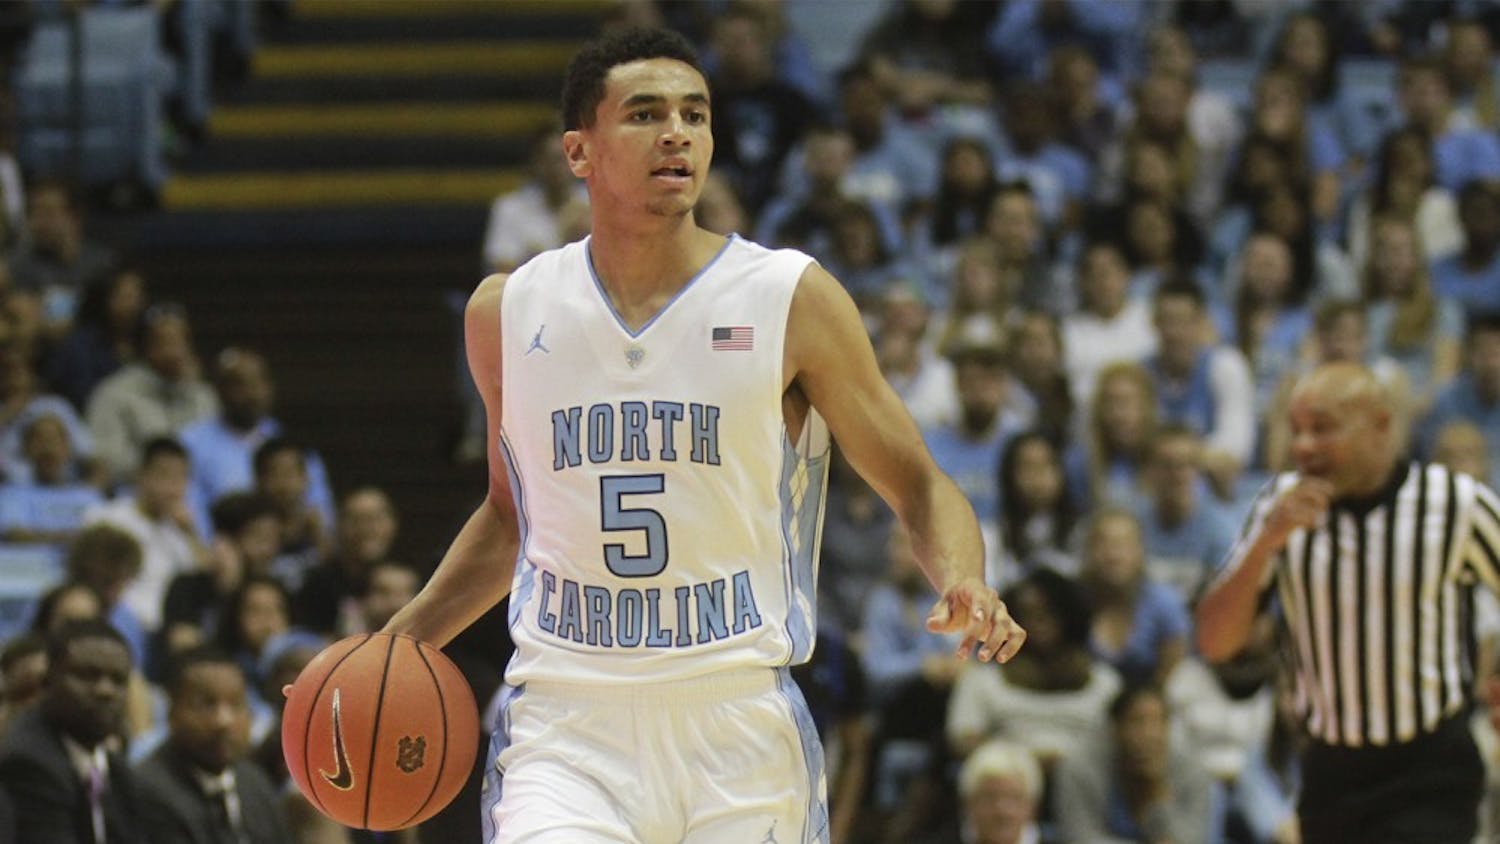 Marcus Paige was selected as the preseason ACC player of the year at the conference’s annual media day Oct. 29. Paige led the Tar Heels during the 2013-14 season with 17.5 points a game.